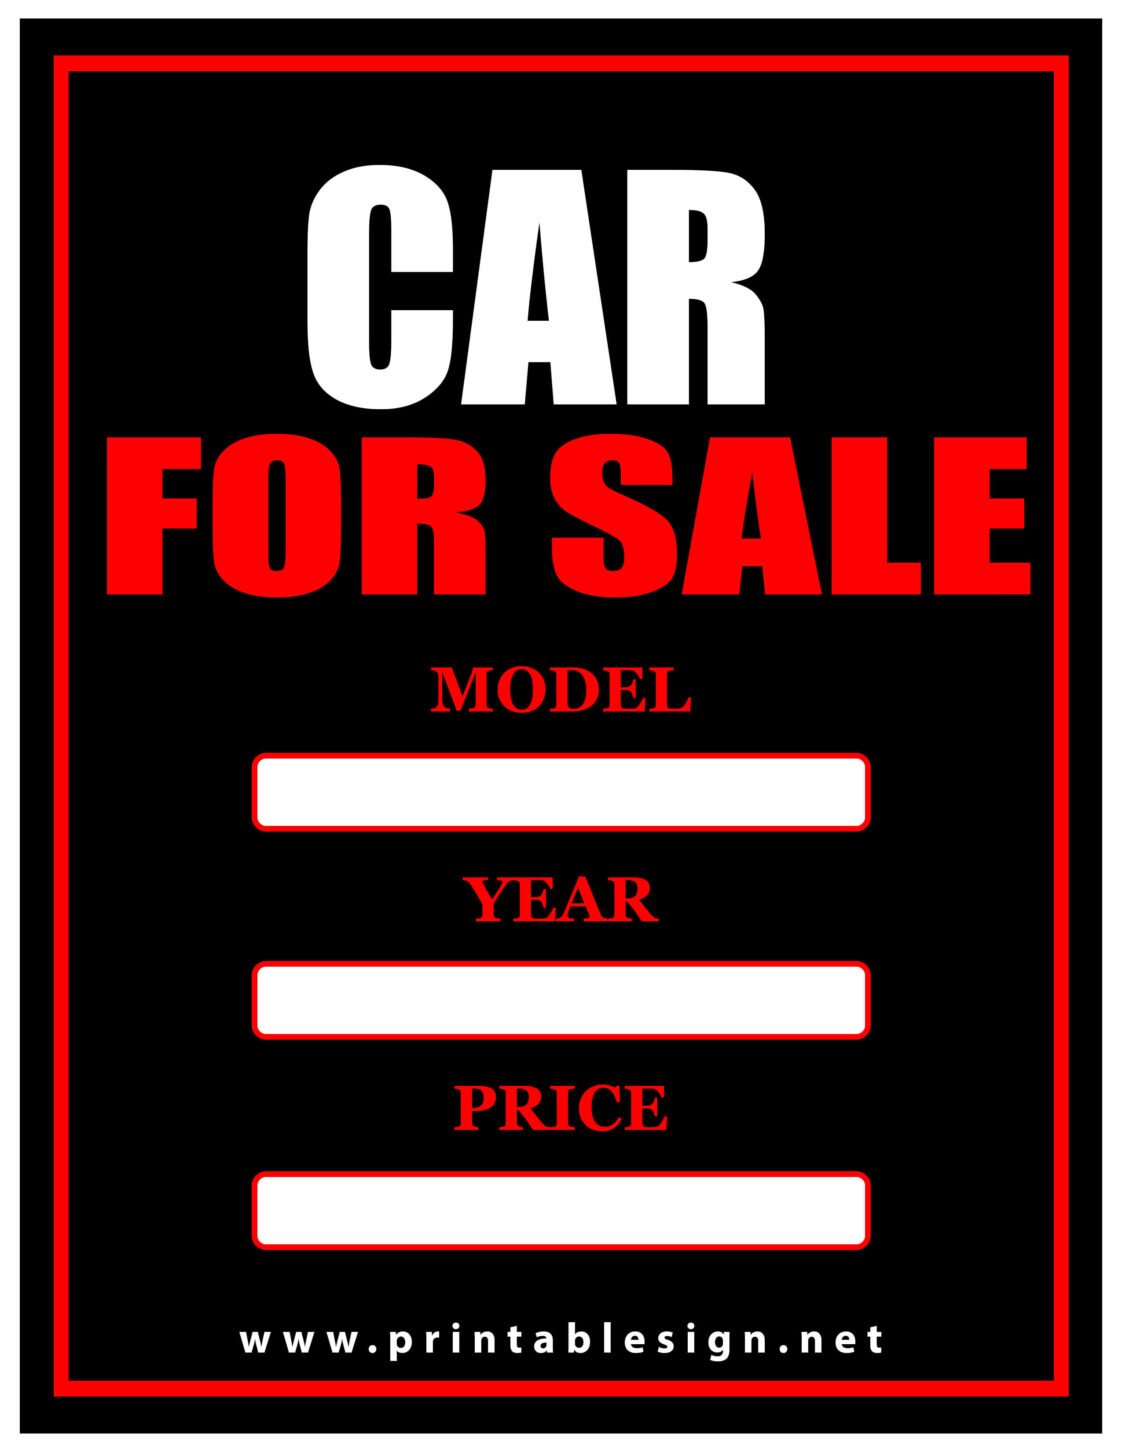 Car For Sale Printable Sign Pack - Printable Signs